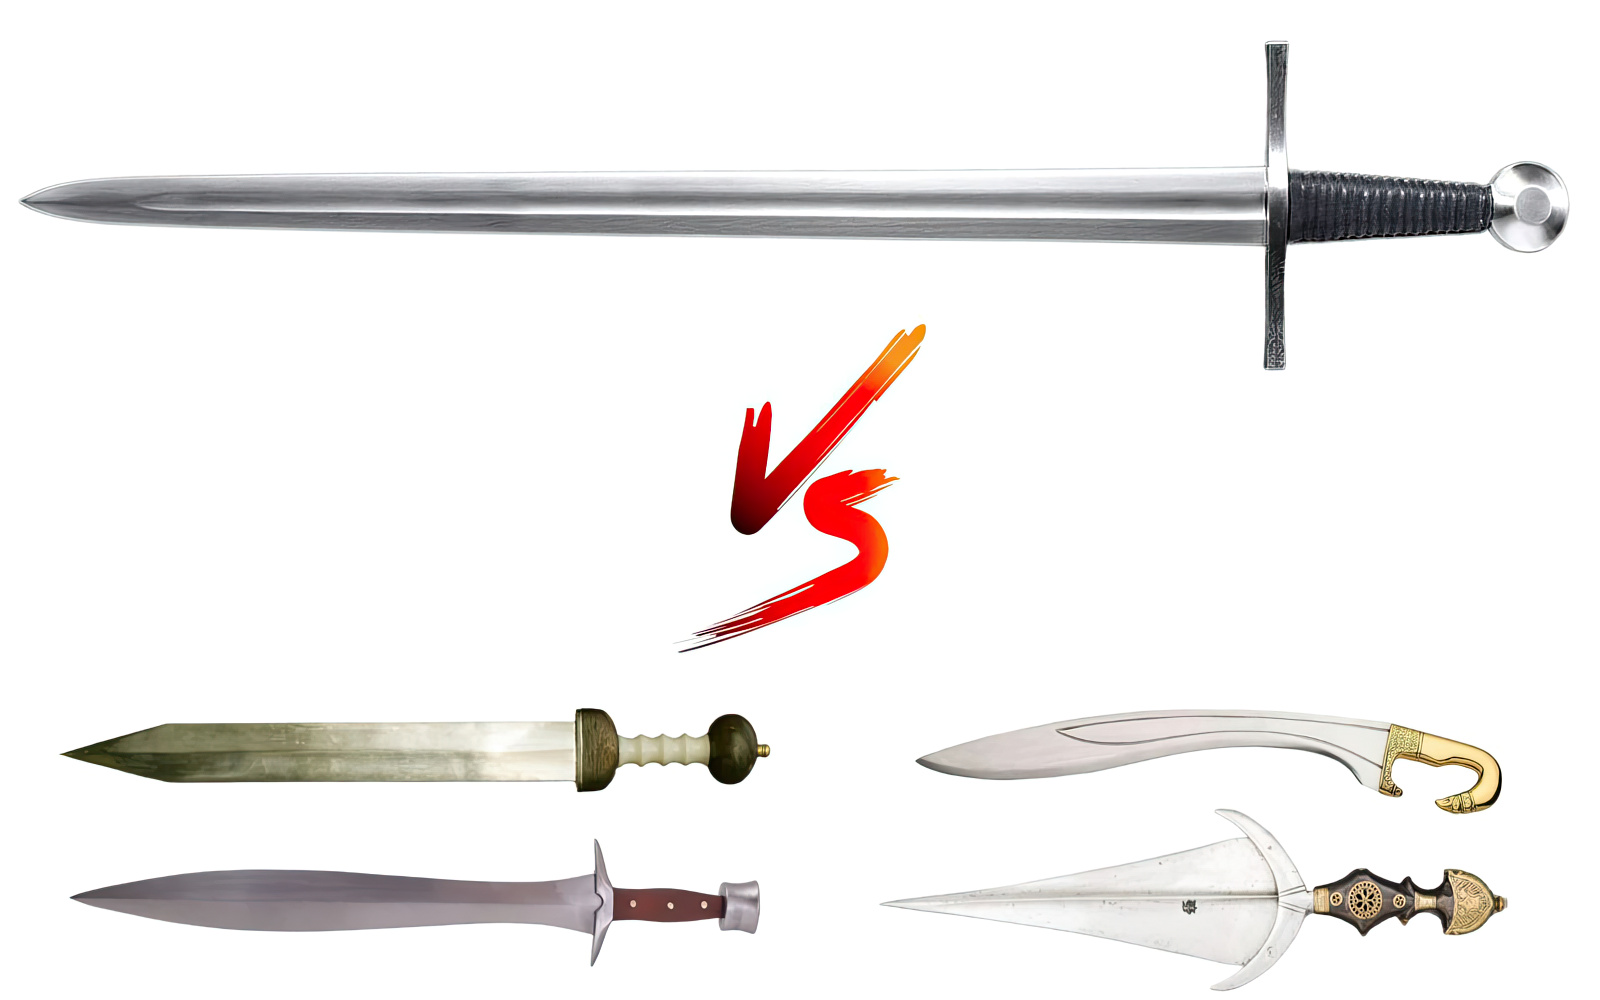 Arming Sword vs Short Sword: Terms, History, and Use